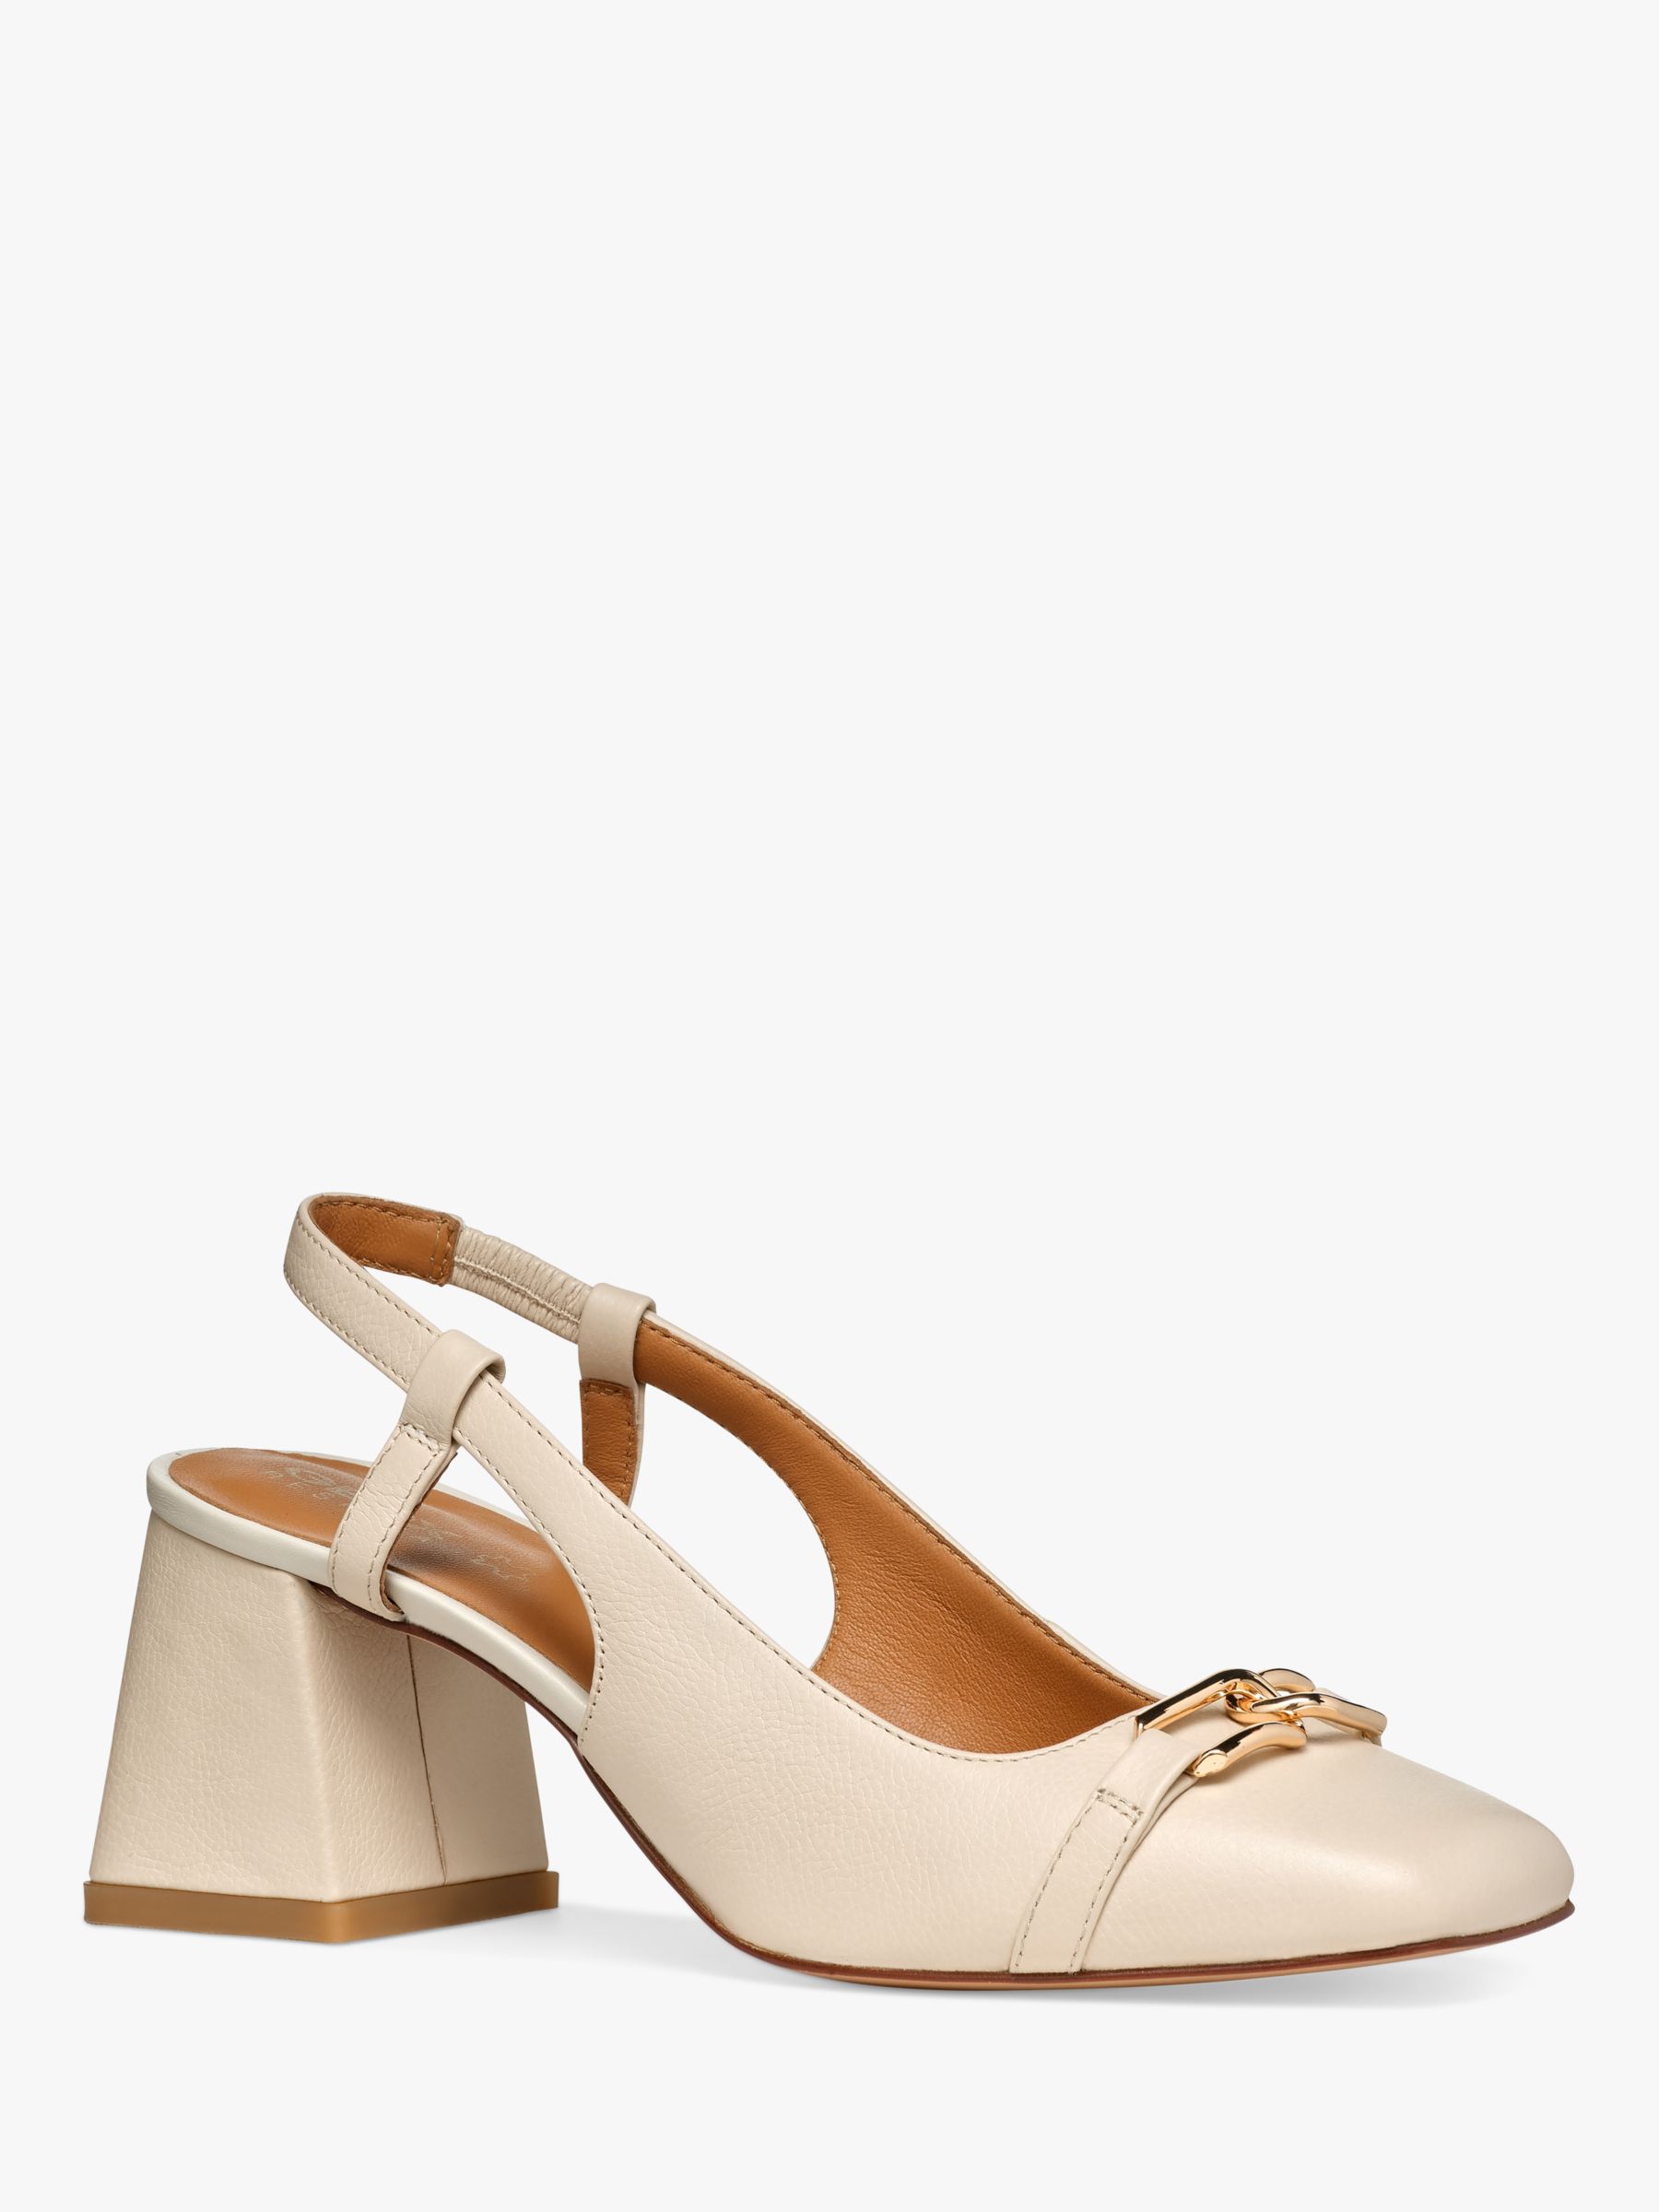 Geox Coronilla Square Toe Leather Slingback Court Shoes, Light Sand at ...